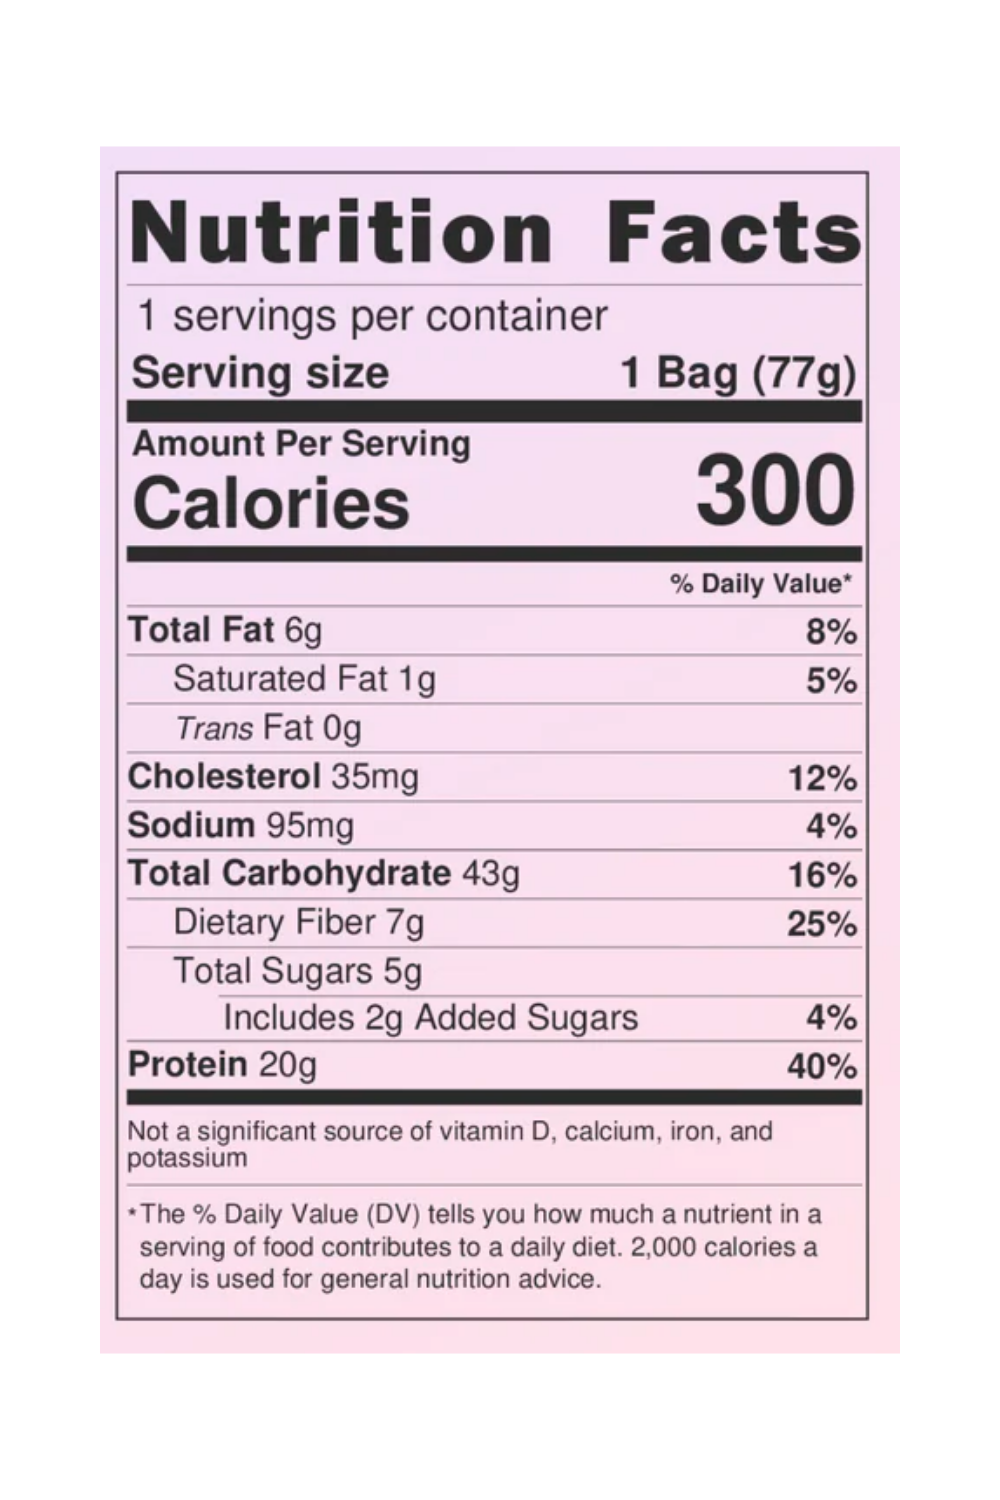 ONO Protein Overnight Oats- "Berry Pancakes", Single Serving, 2.72 oz packet.